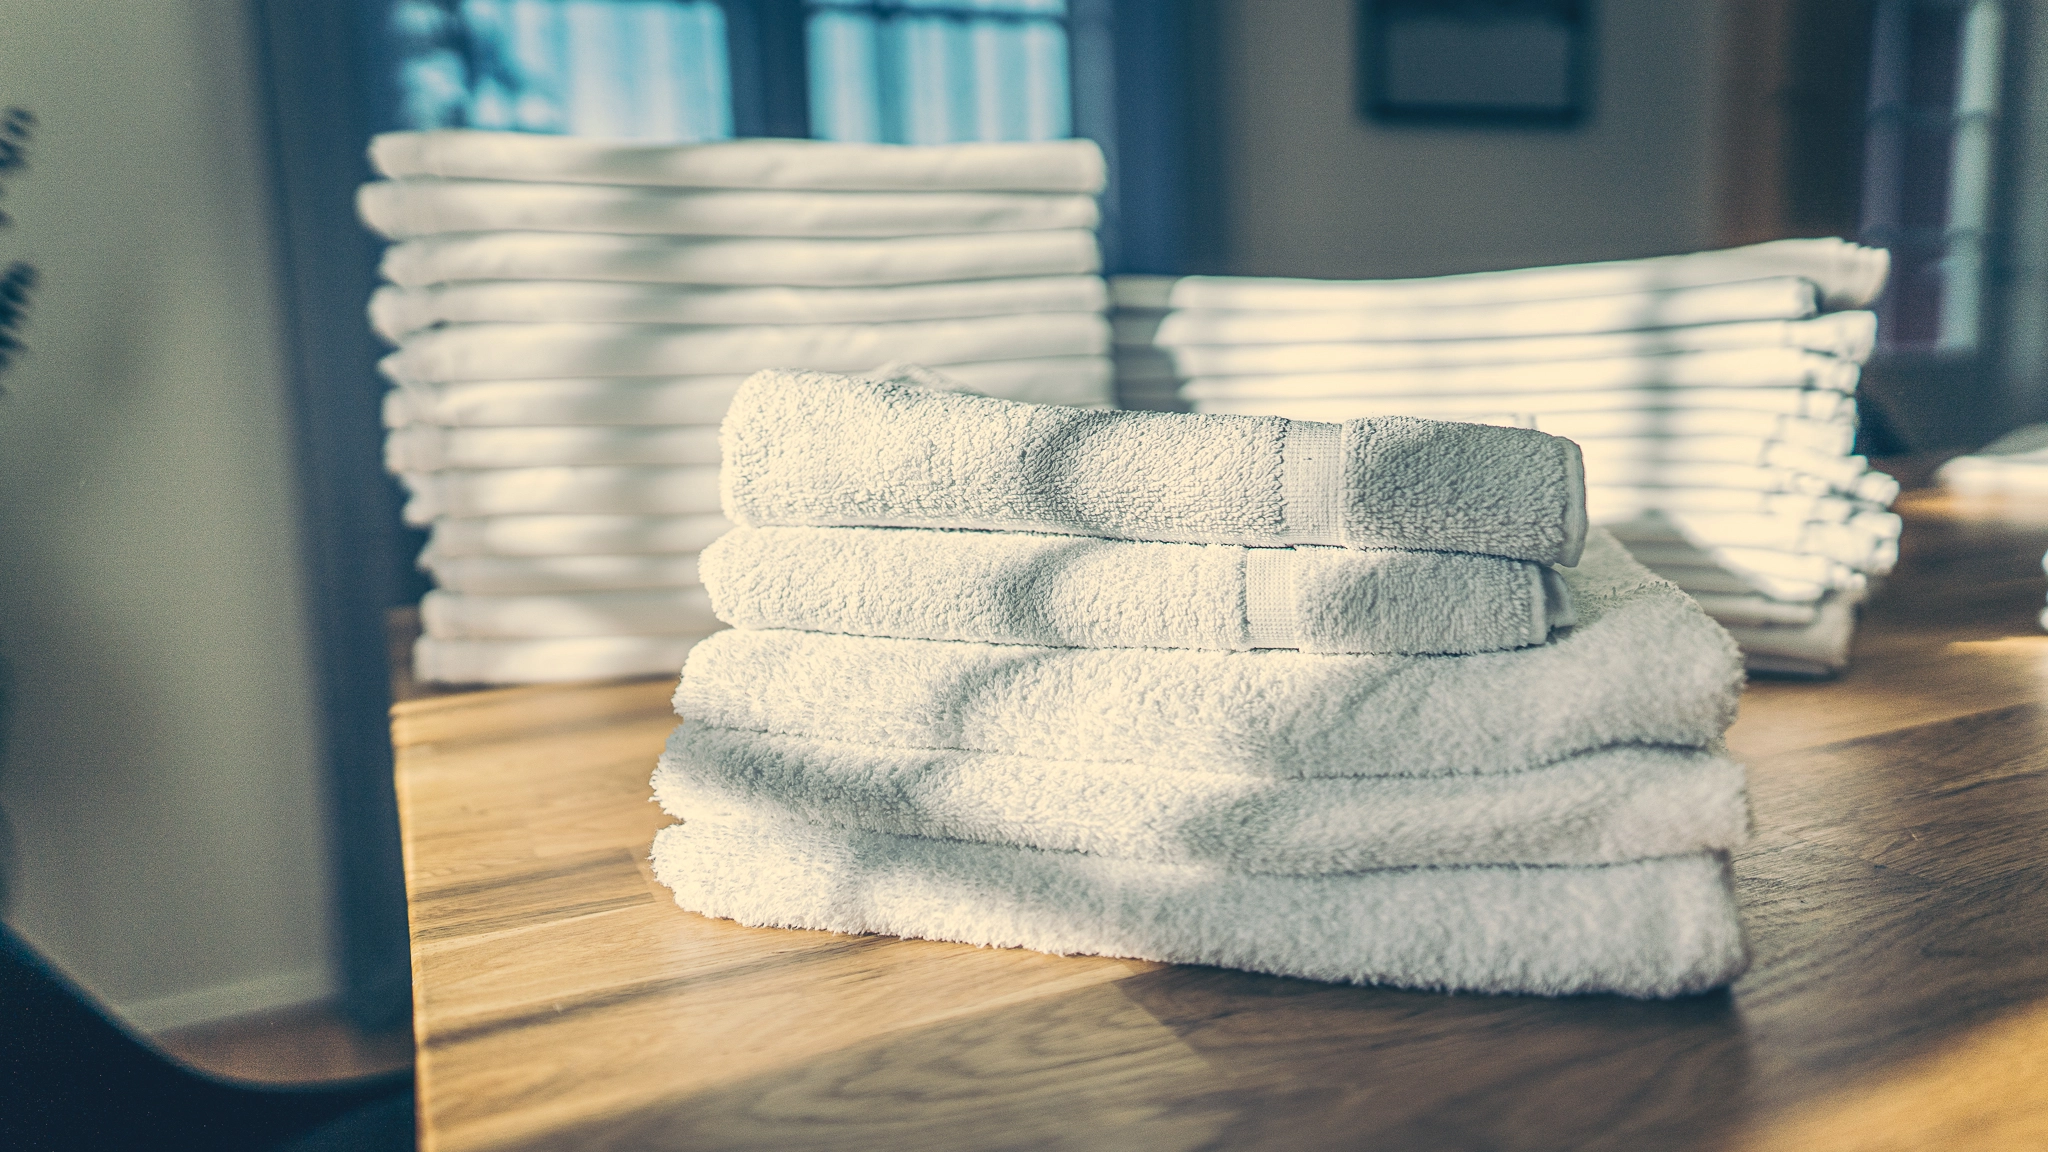 Super Laundry also provides hotel textile washing services.